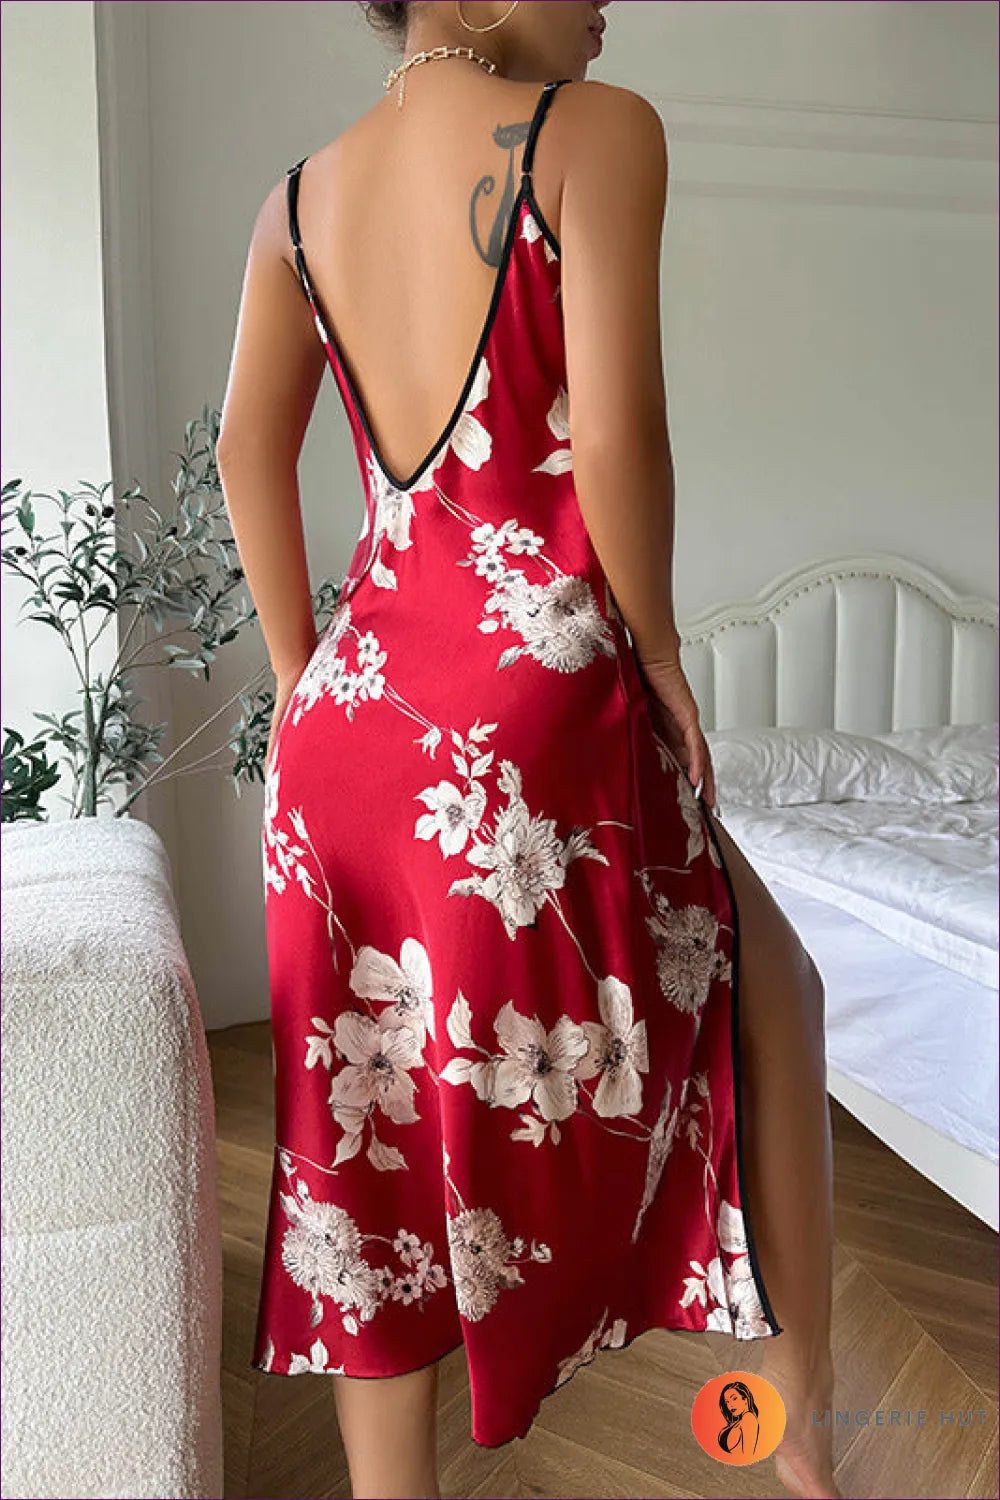 Indulge In Sultry Sophistication With Our Summer Floral Nightdress. Crafted Imitated Silk, This Backless, Slit